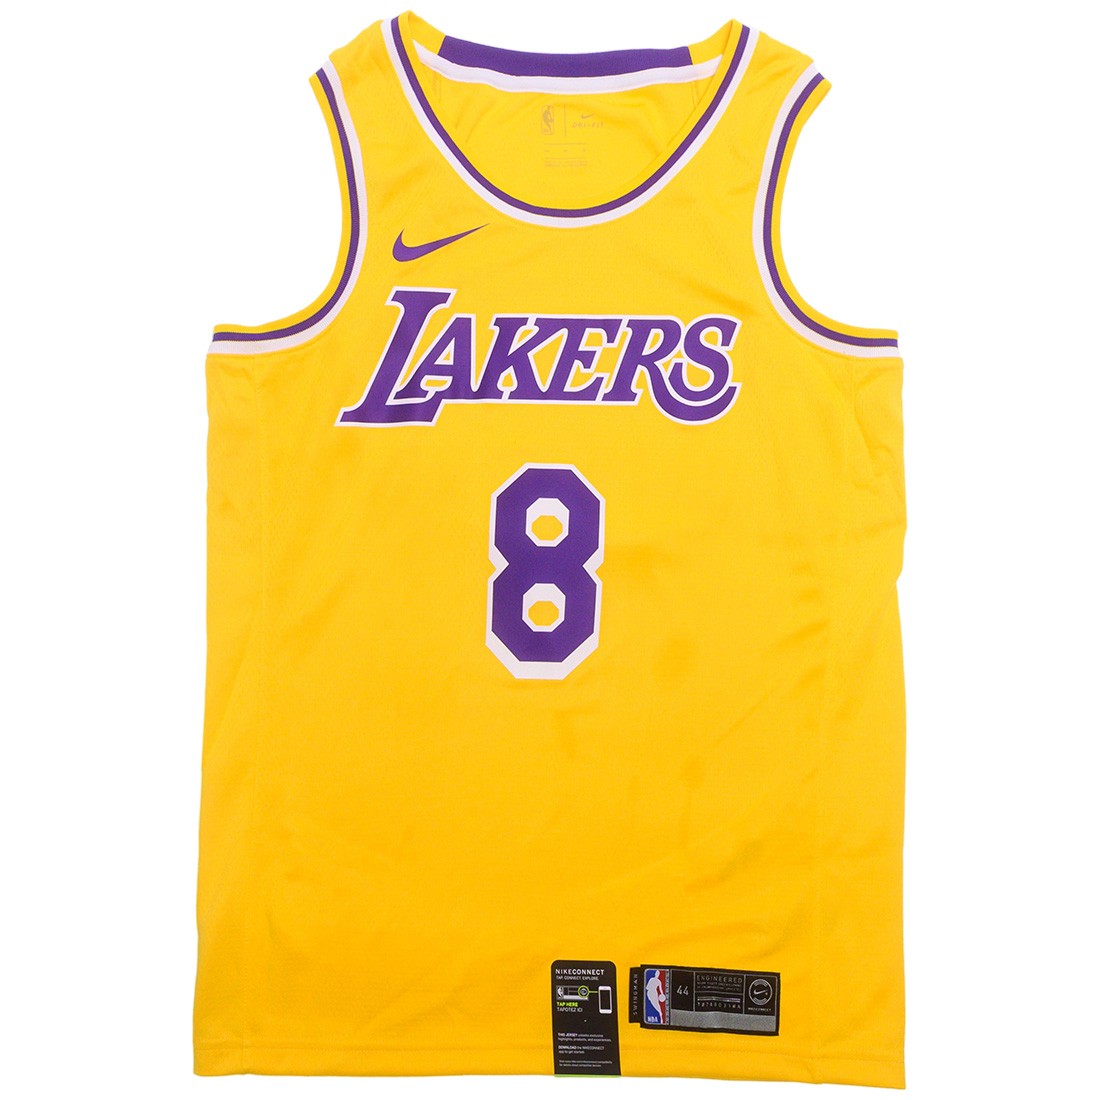 bryant's jersey